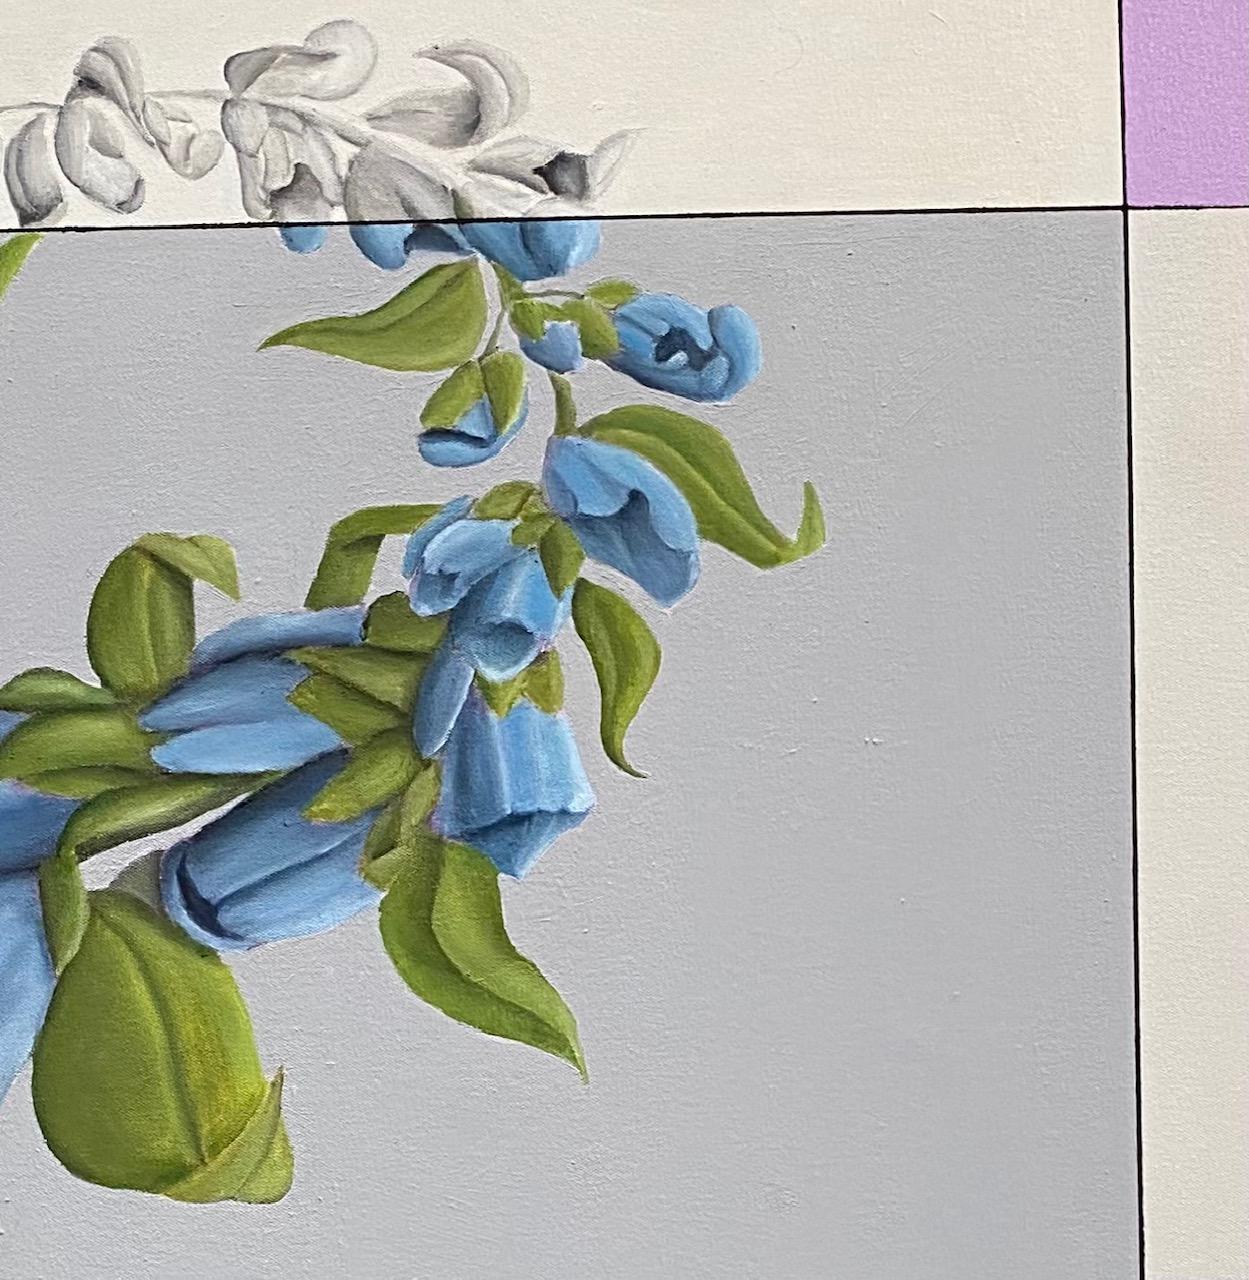 With an art nouveau flair, artist Jim Twerell has given this foxglove hybrid floral a contemporary presence.   The curvature of the teal blue conical petals and stems juxtaposed with the geometric under pinning graphics in lavender, gray, purple and